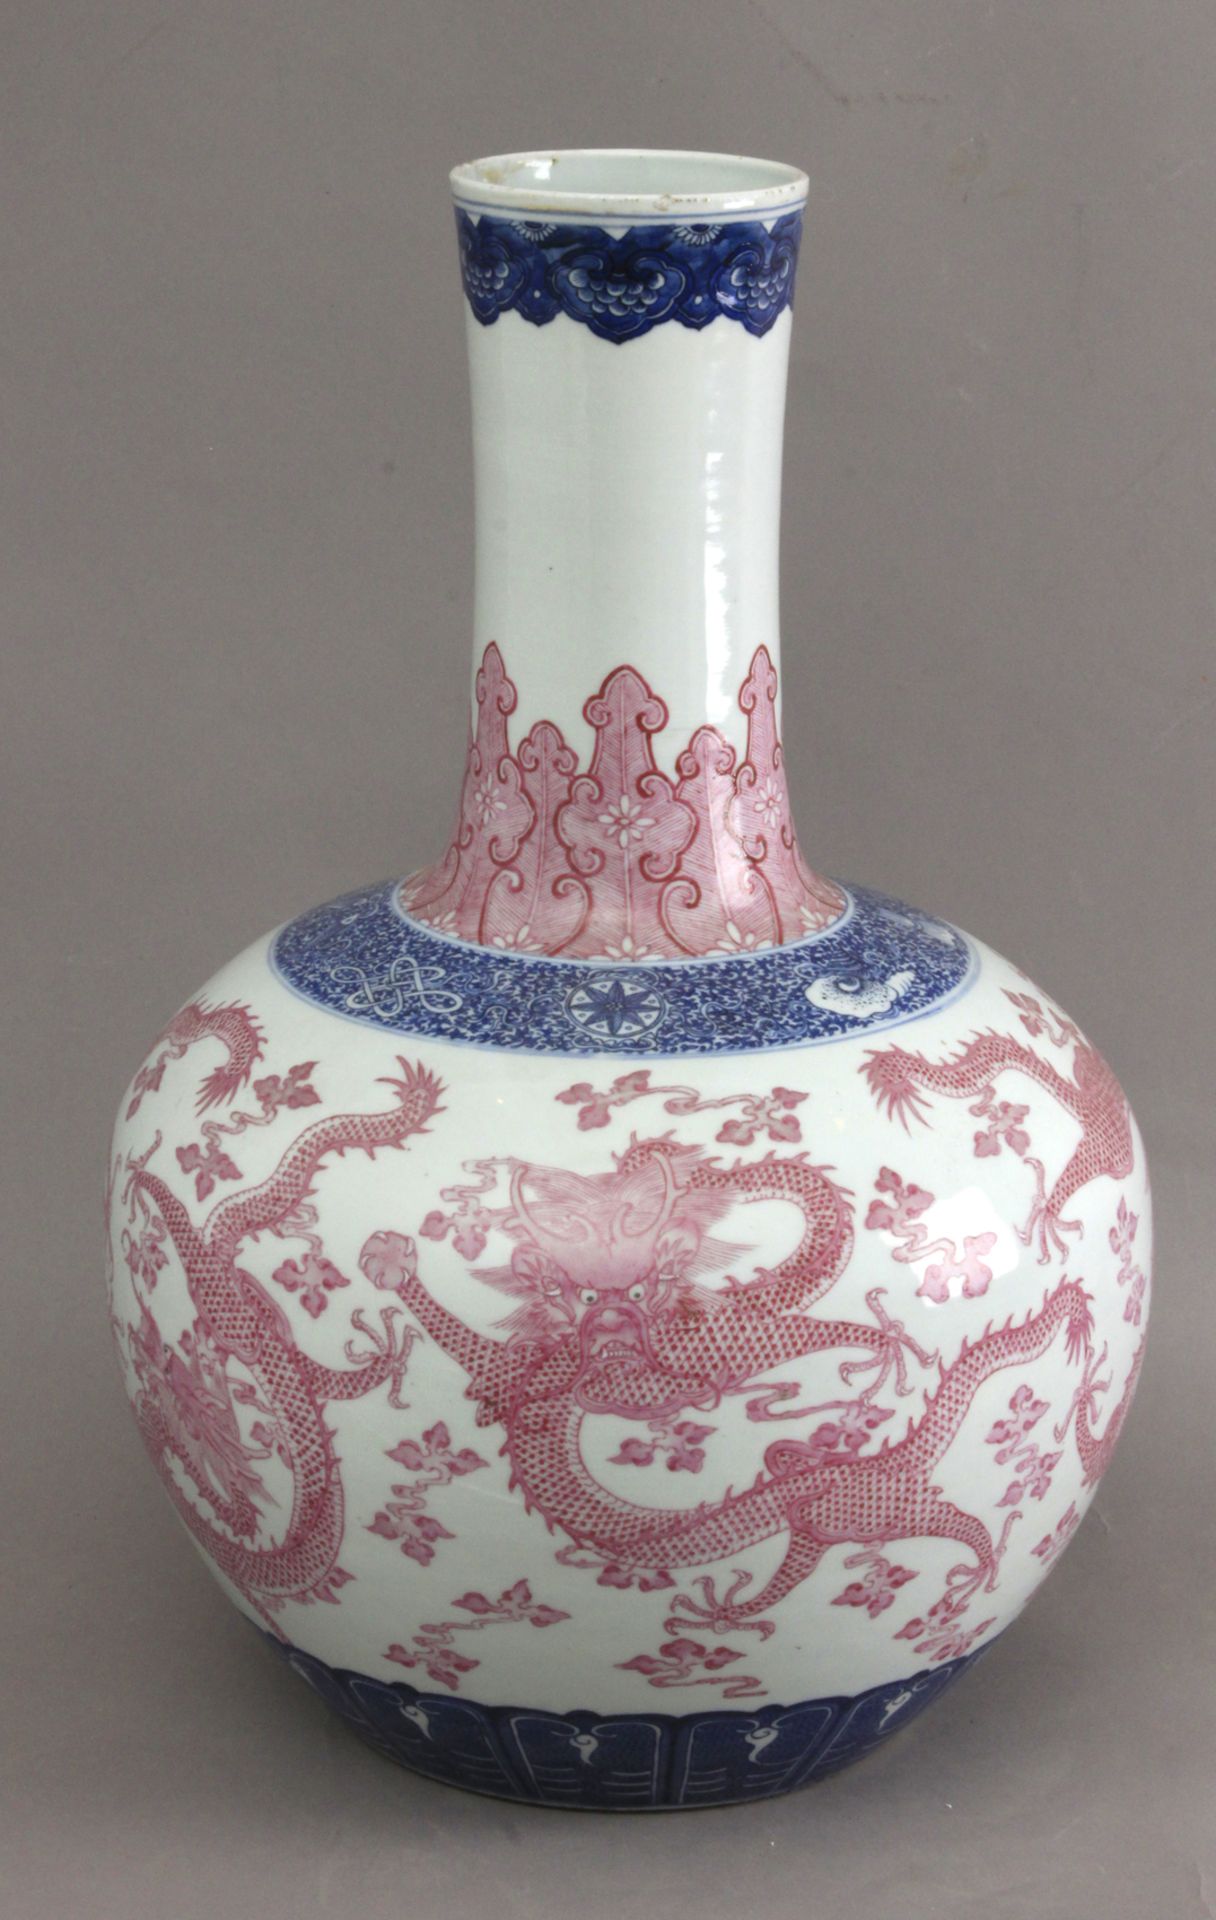 A first third of 20th century Tianqiuping porcelain vase